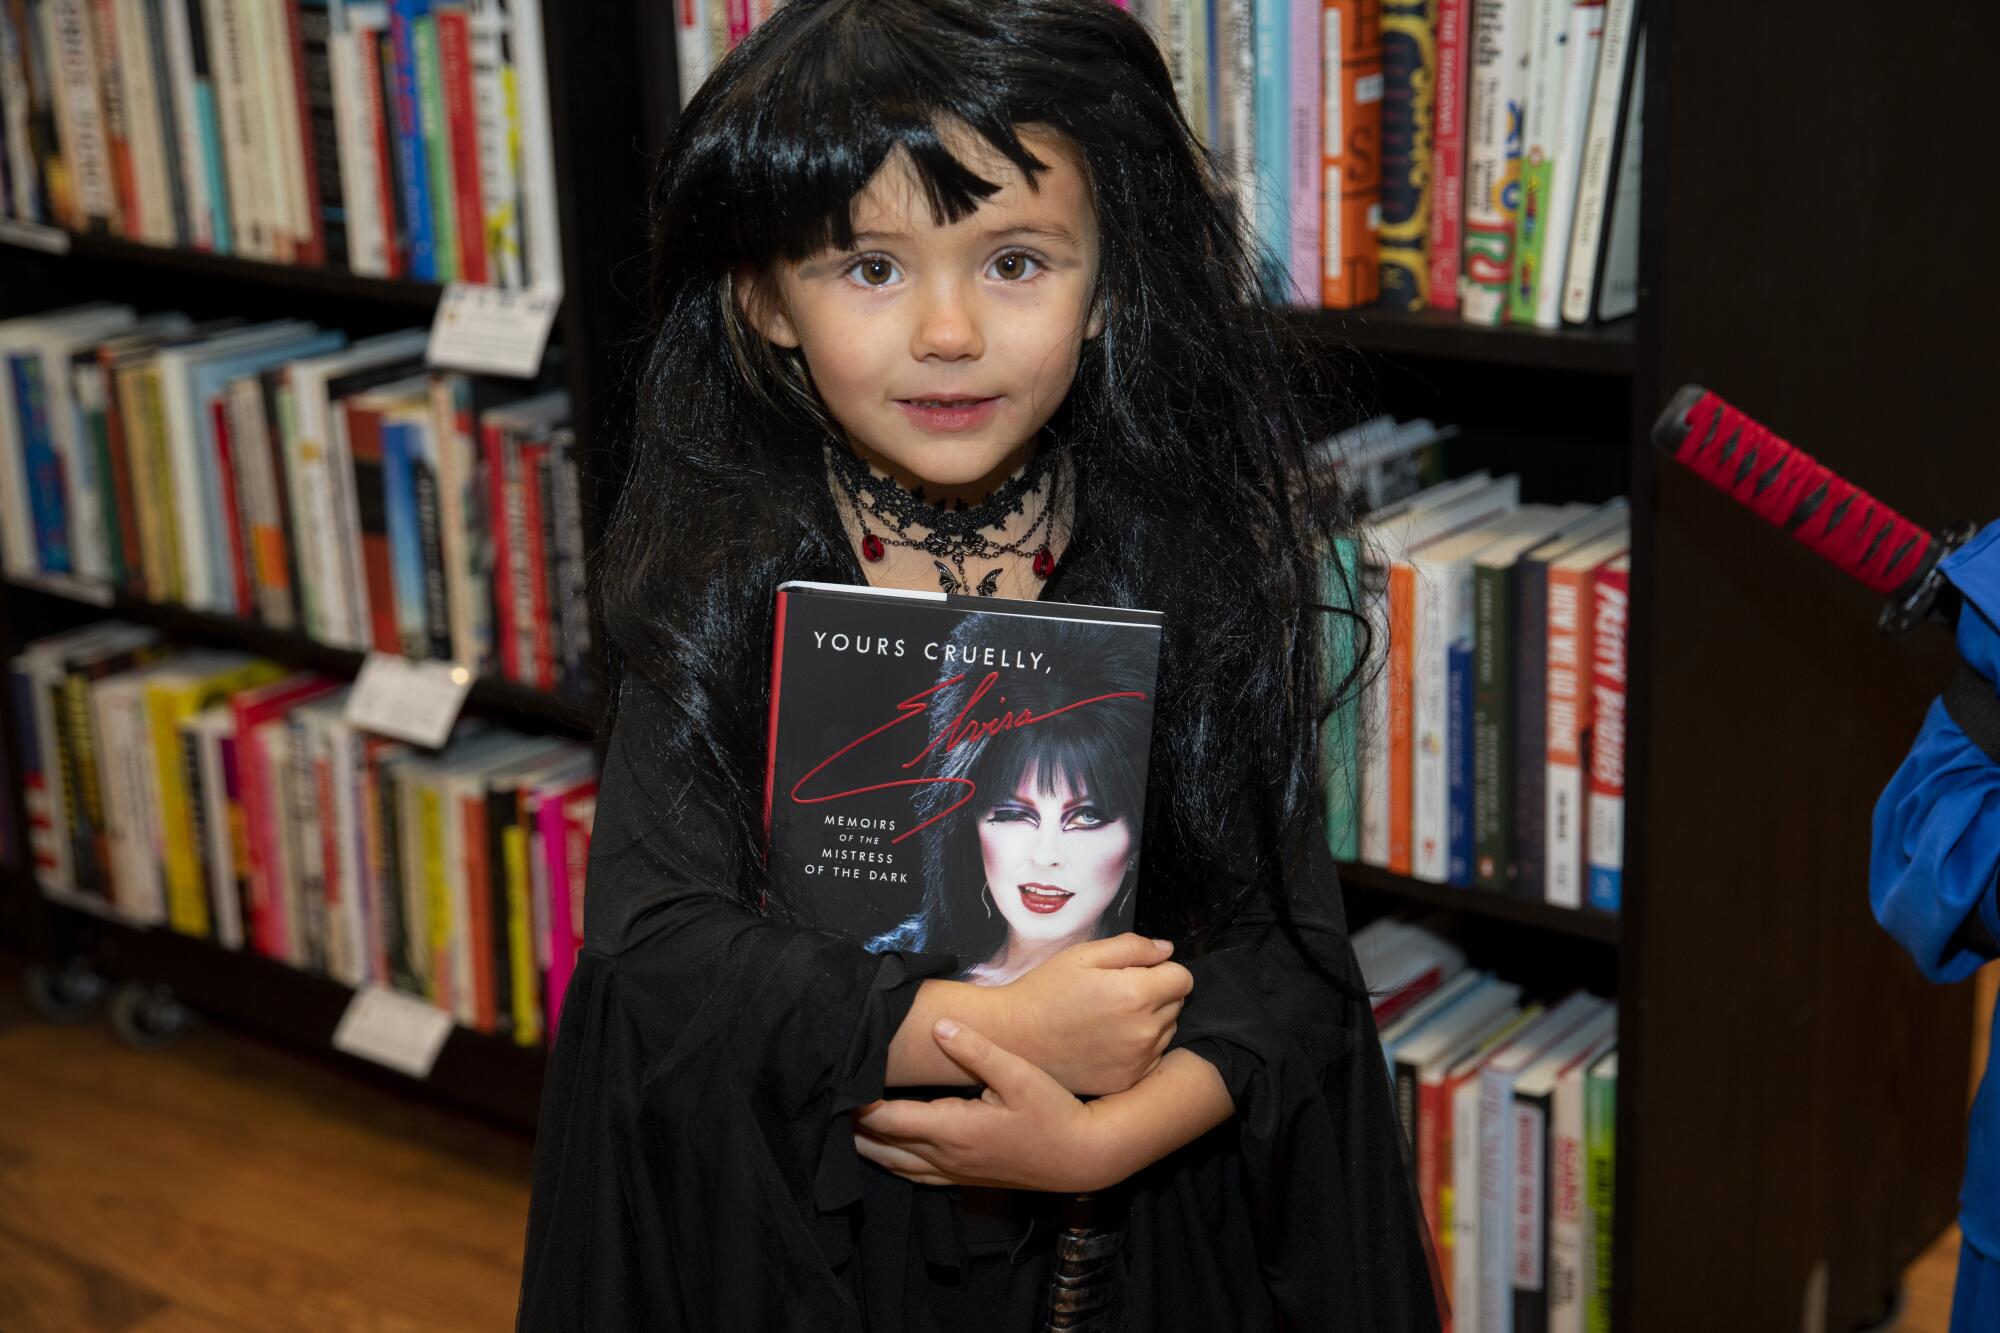 A little girl in a black wig holds a book